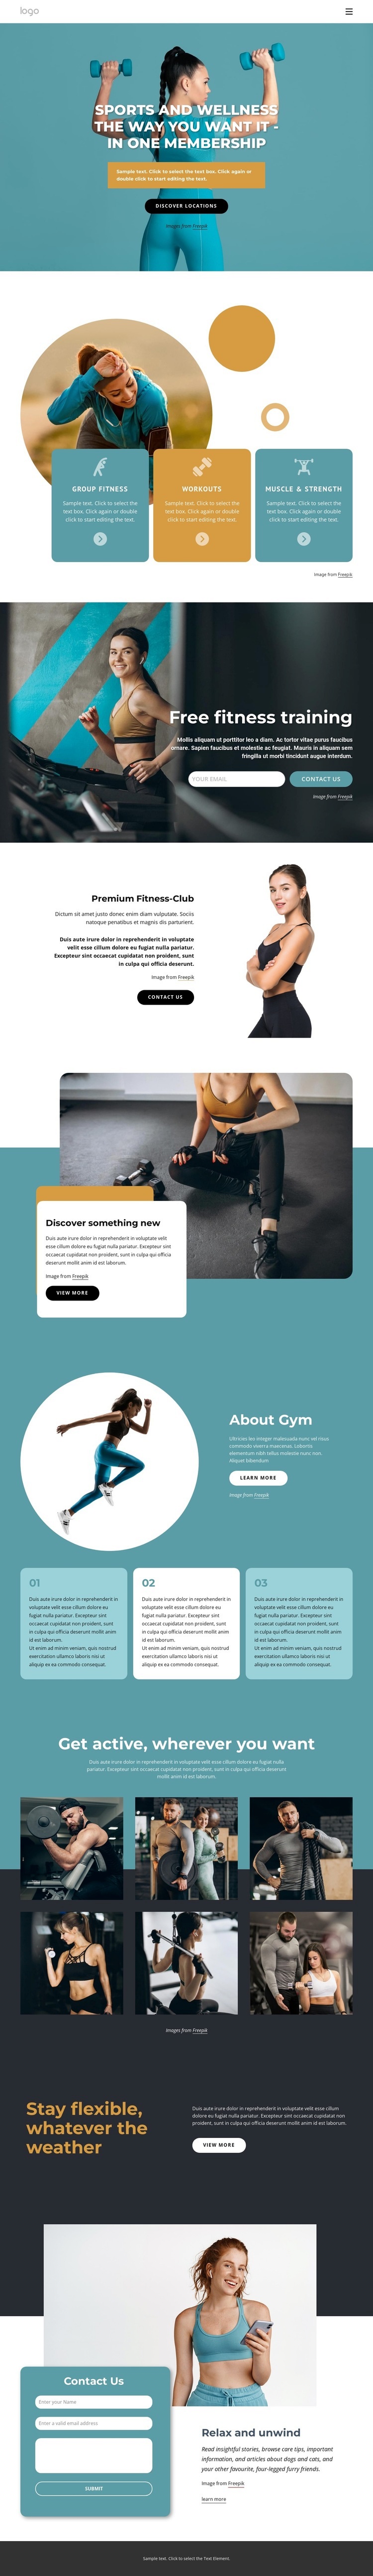 Workout anywhere with one membership Webflow Template Alternative